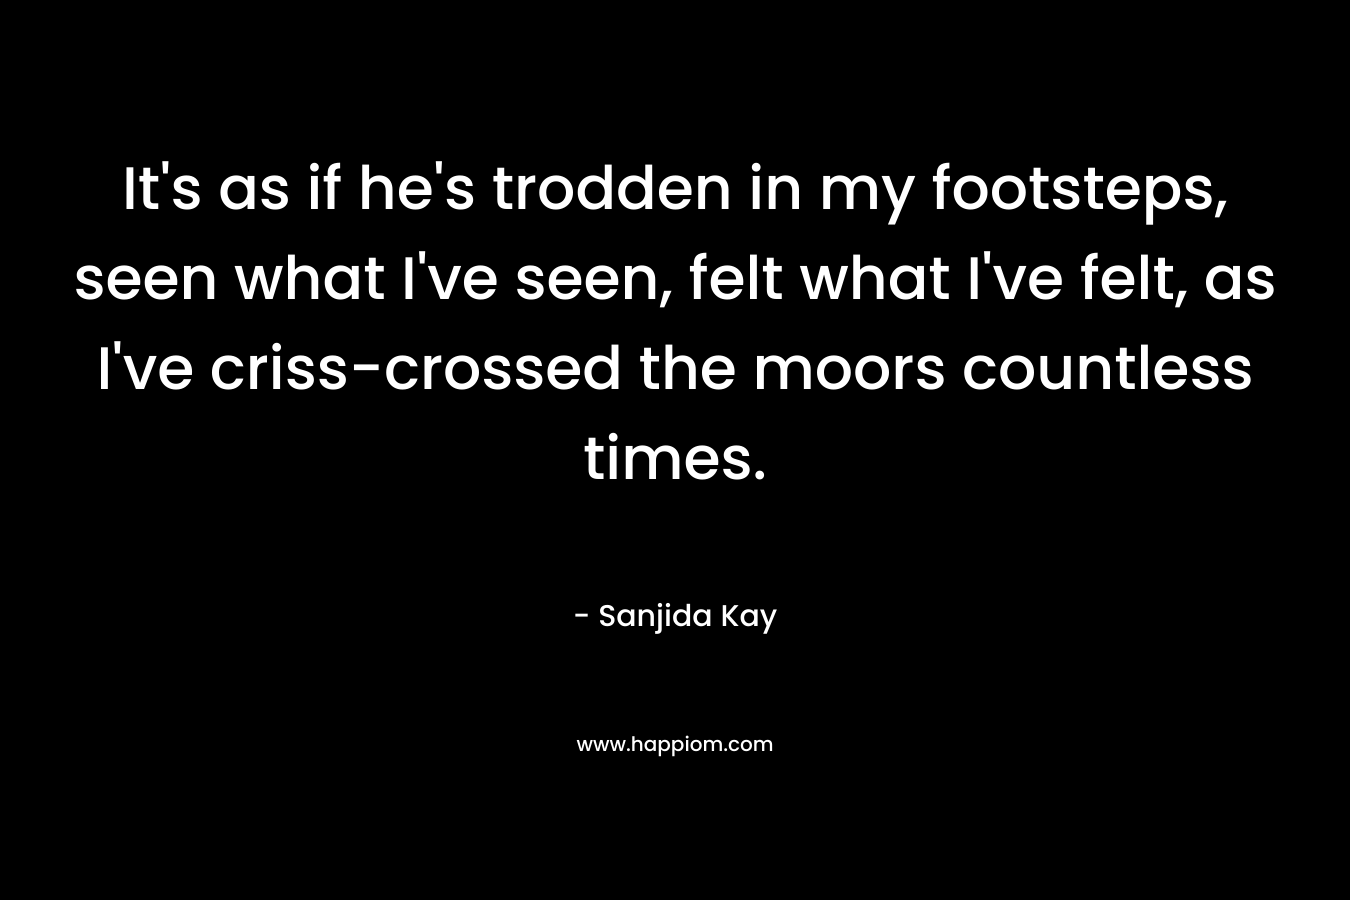 It’s as if he’s trodden in my footsteps, seen what I’ve seen, felt what I’ve felt, as I’ve criss-crossed the moors countless times. – Sanjida Kay